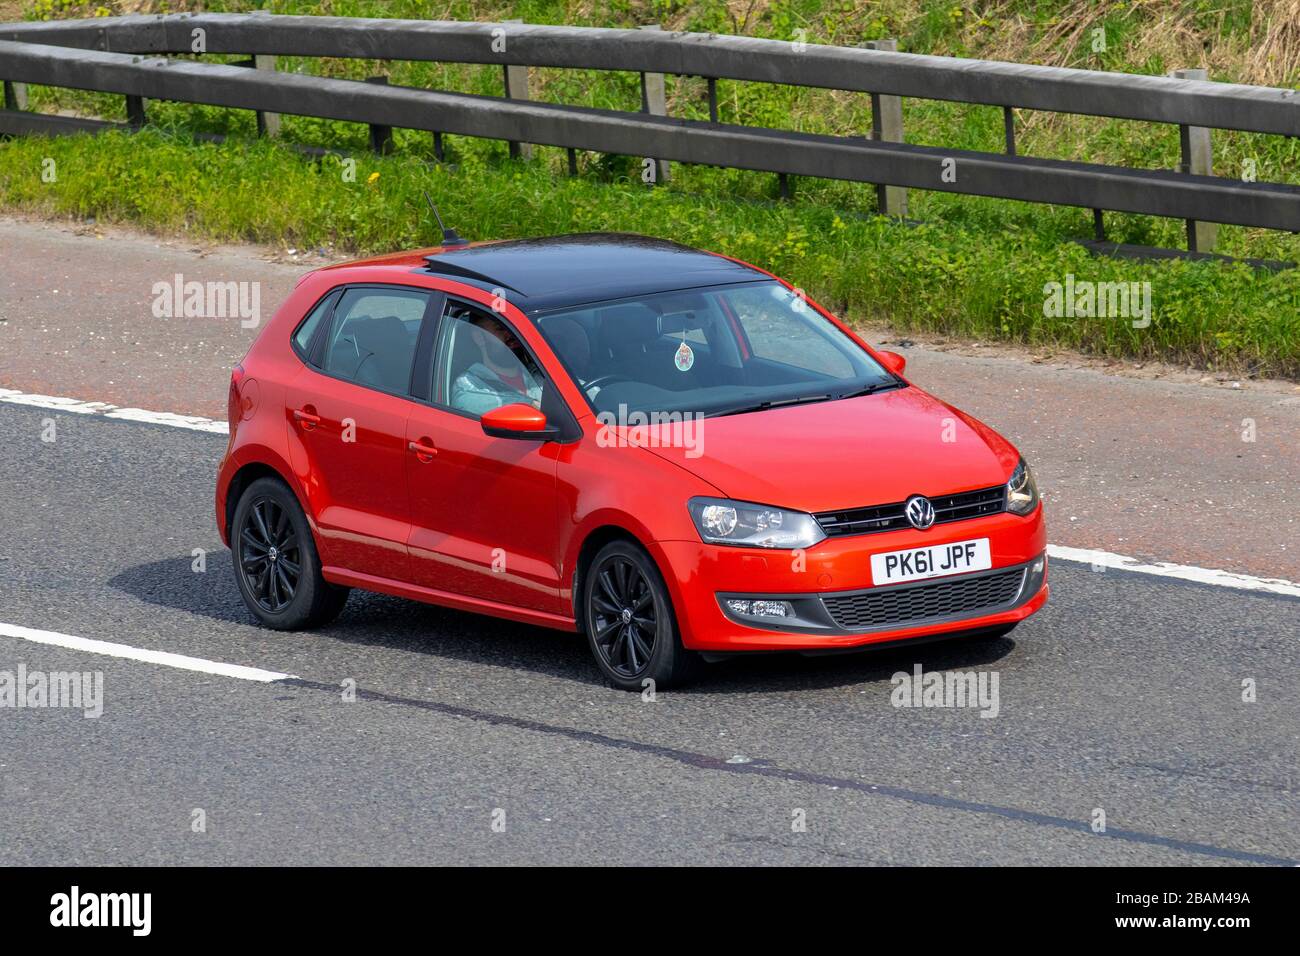 Vw Volkswagen Polo Tdi High Resolution Stock Photography and Images - Alamy